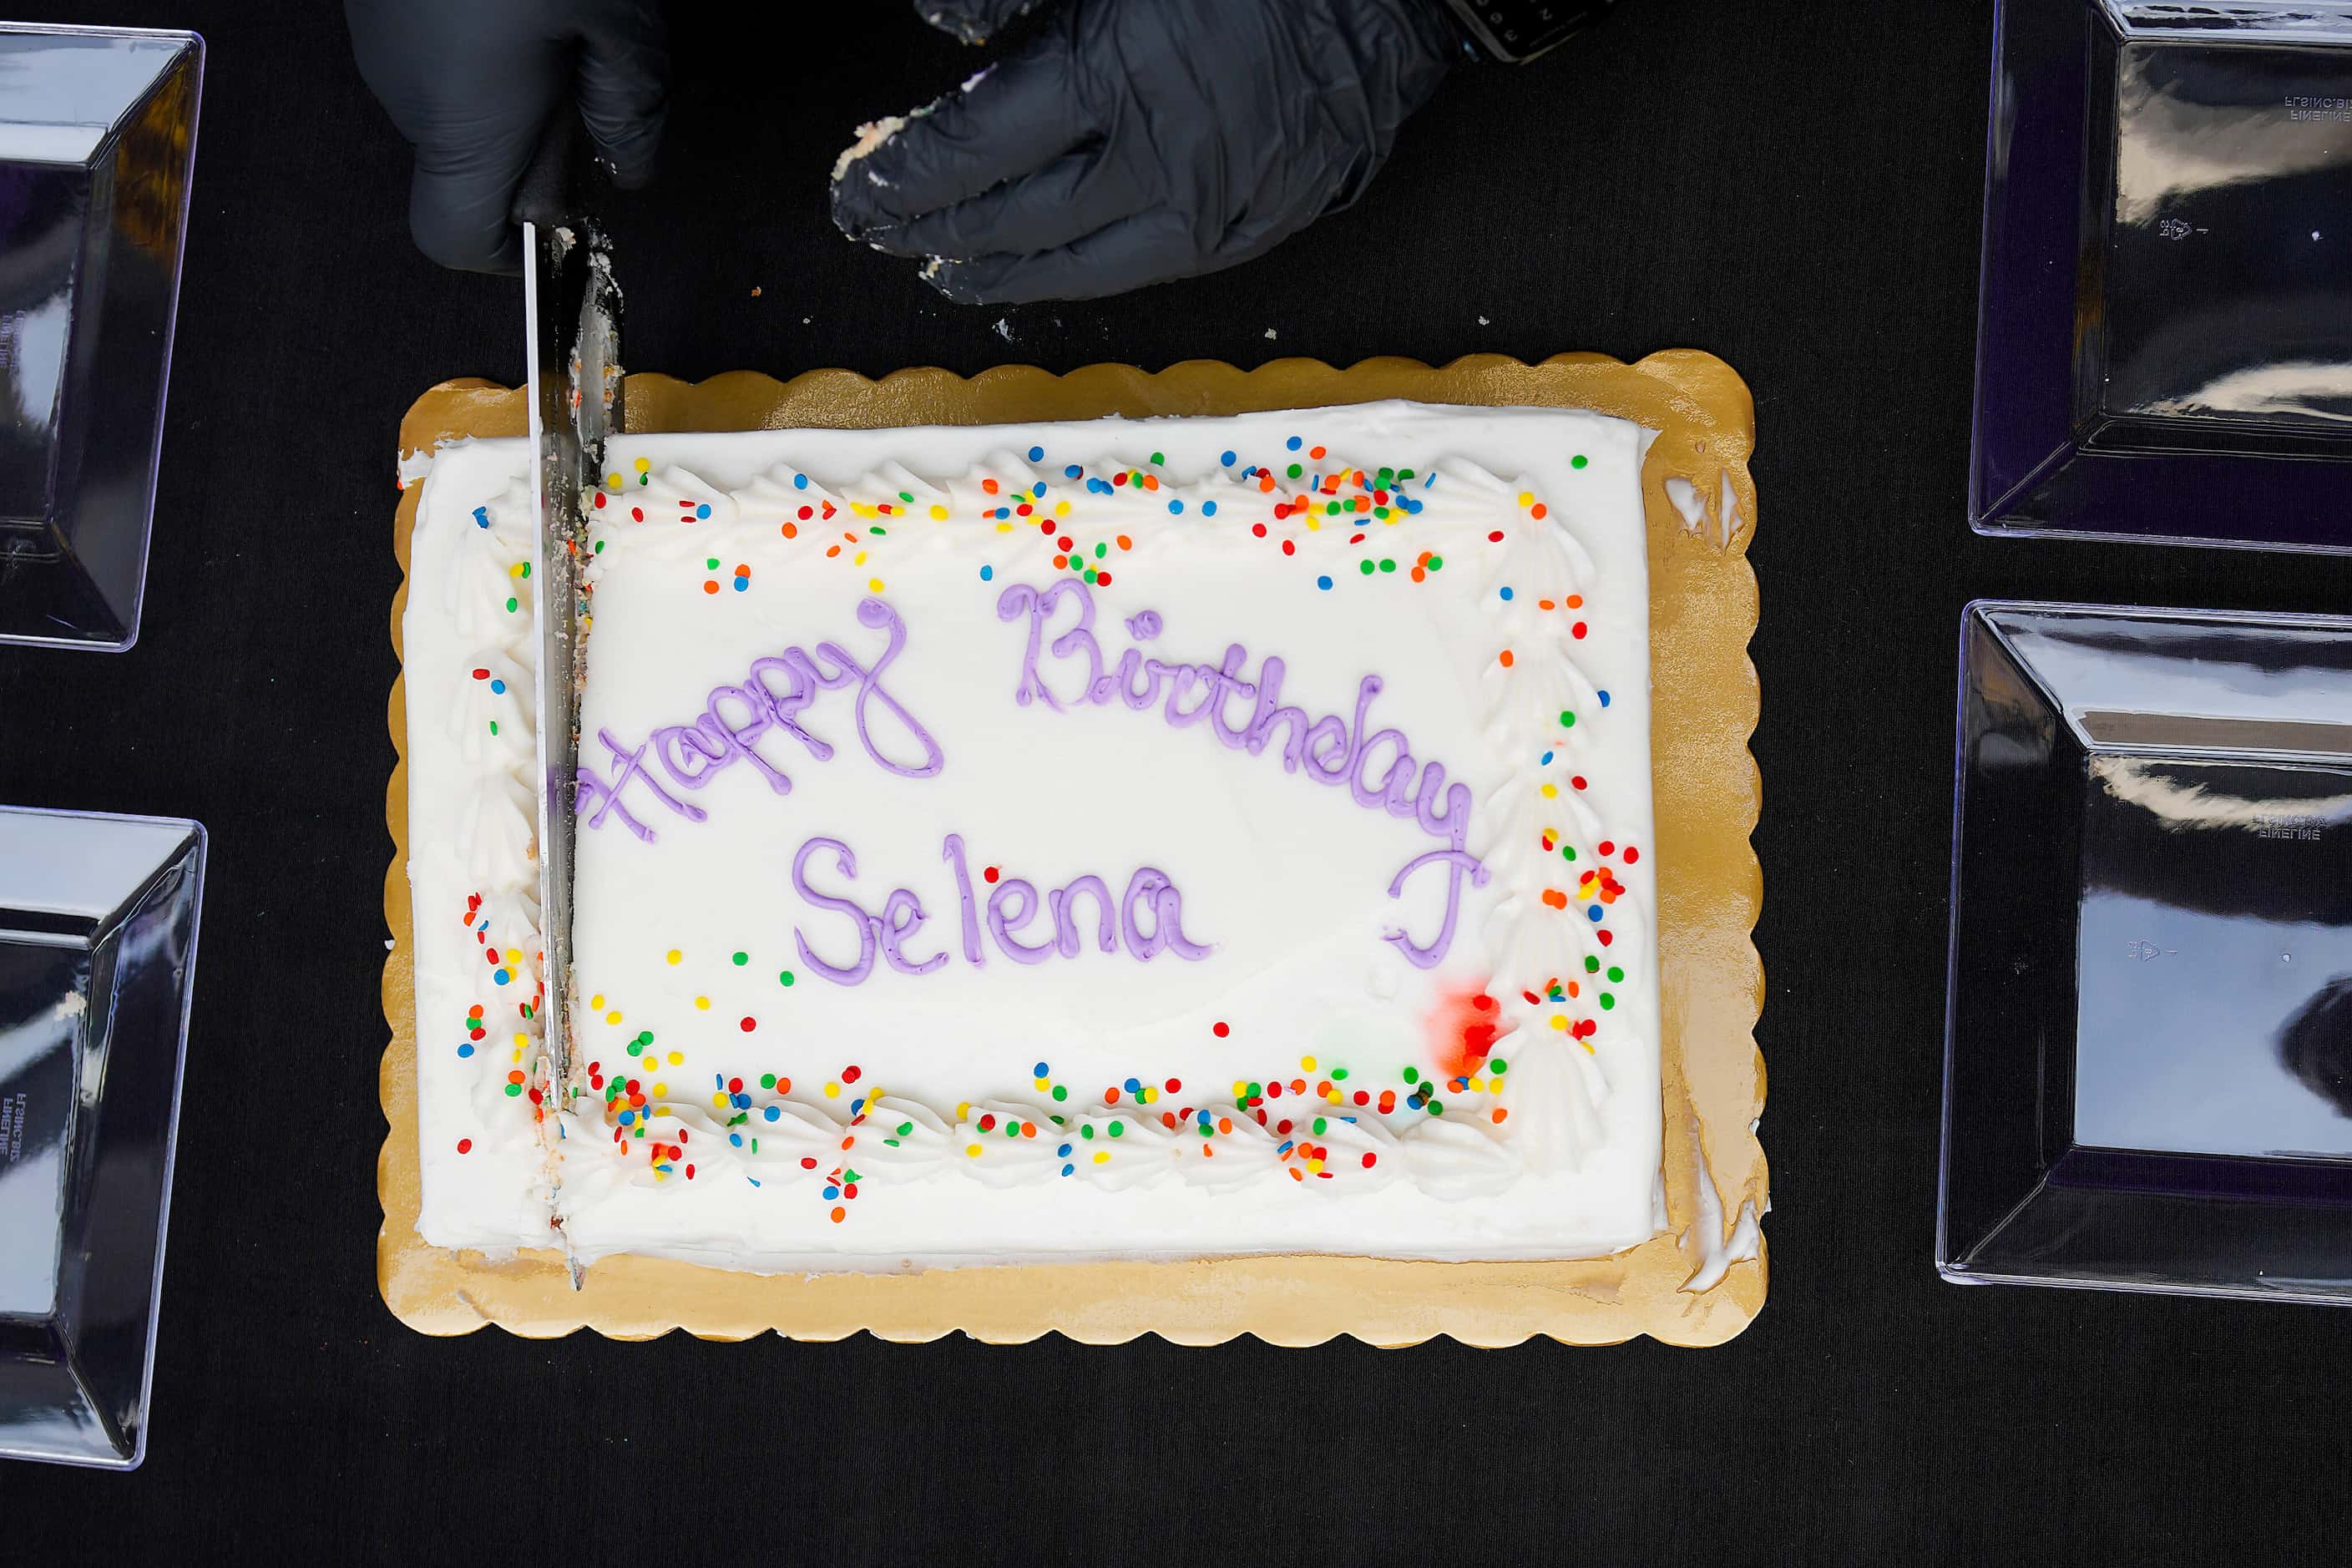 A birthday cake for singer Selena Quintanilla is cut during a Selena Day celebration at the...